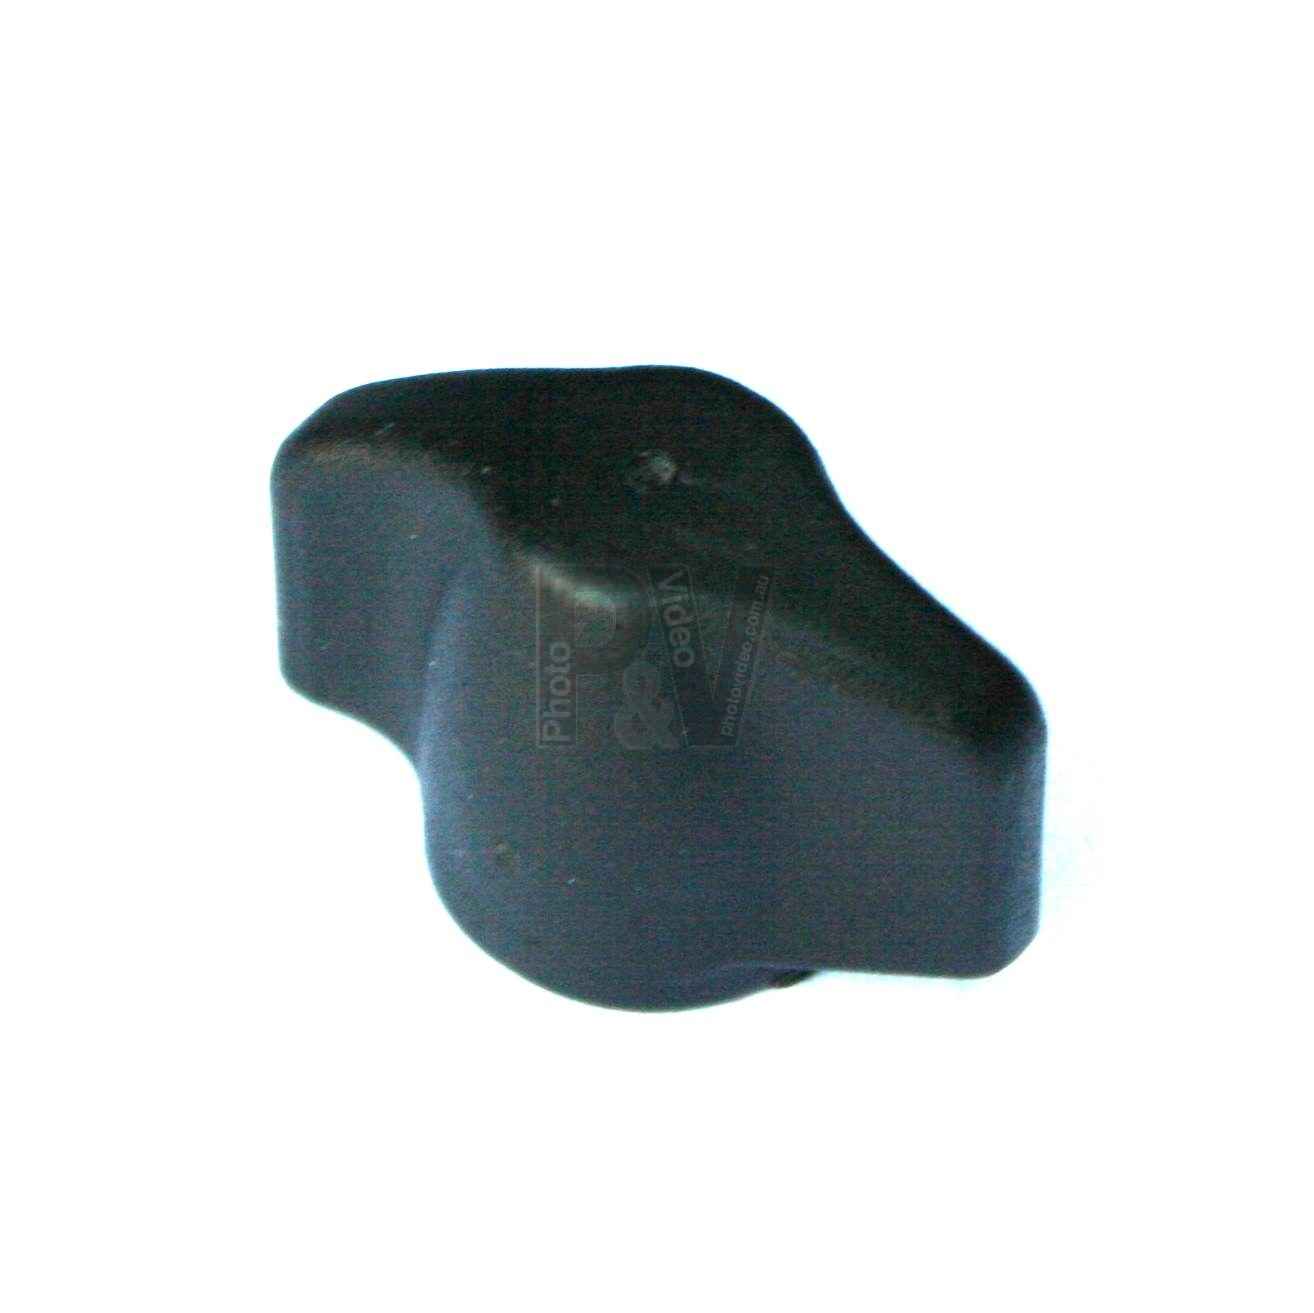 Manfrotto R128.55 Pan lock Knob for 128RC